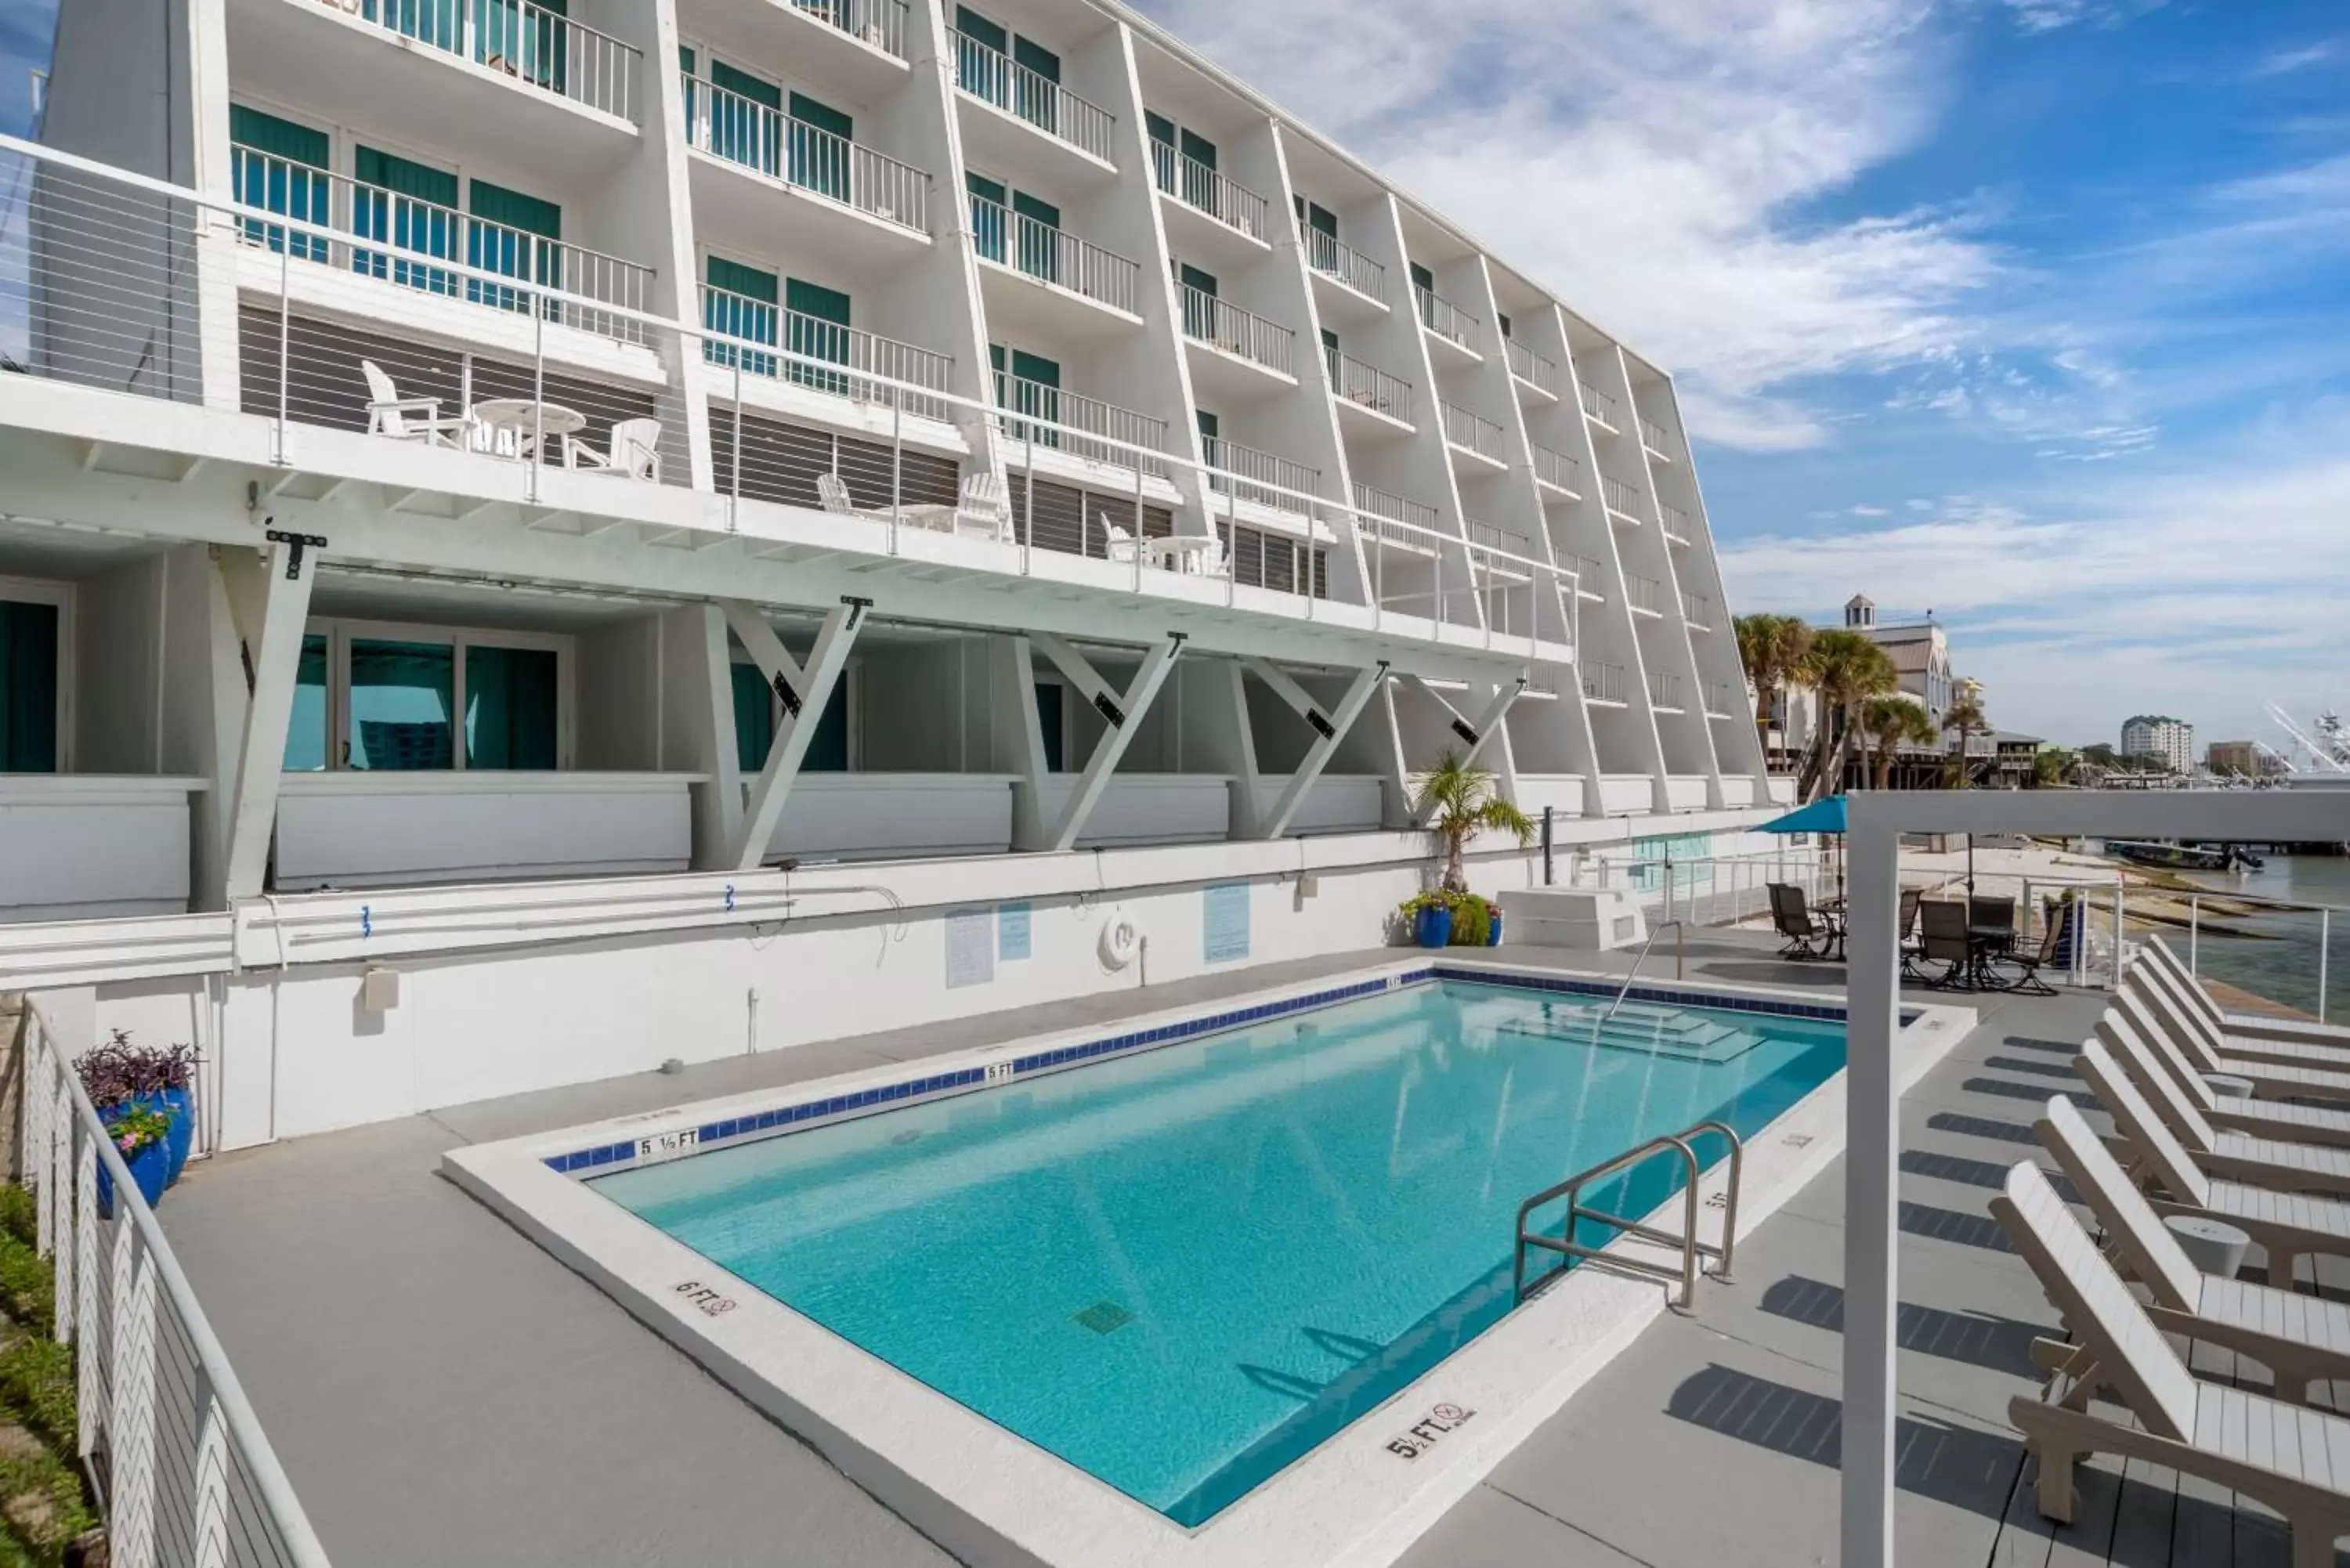 Day, Swimming Pool in Inn on Destin Harbor, Ascend Hotel Collection